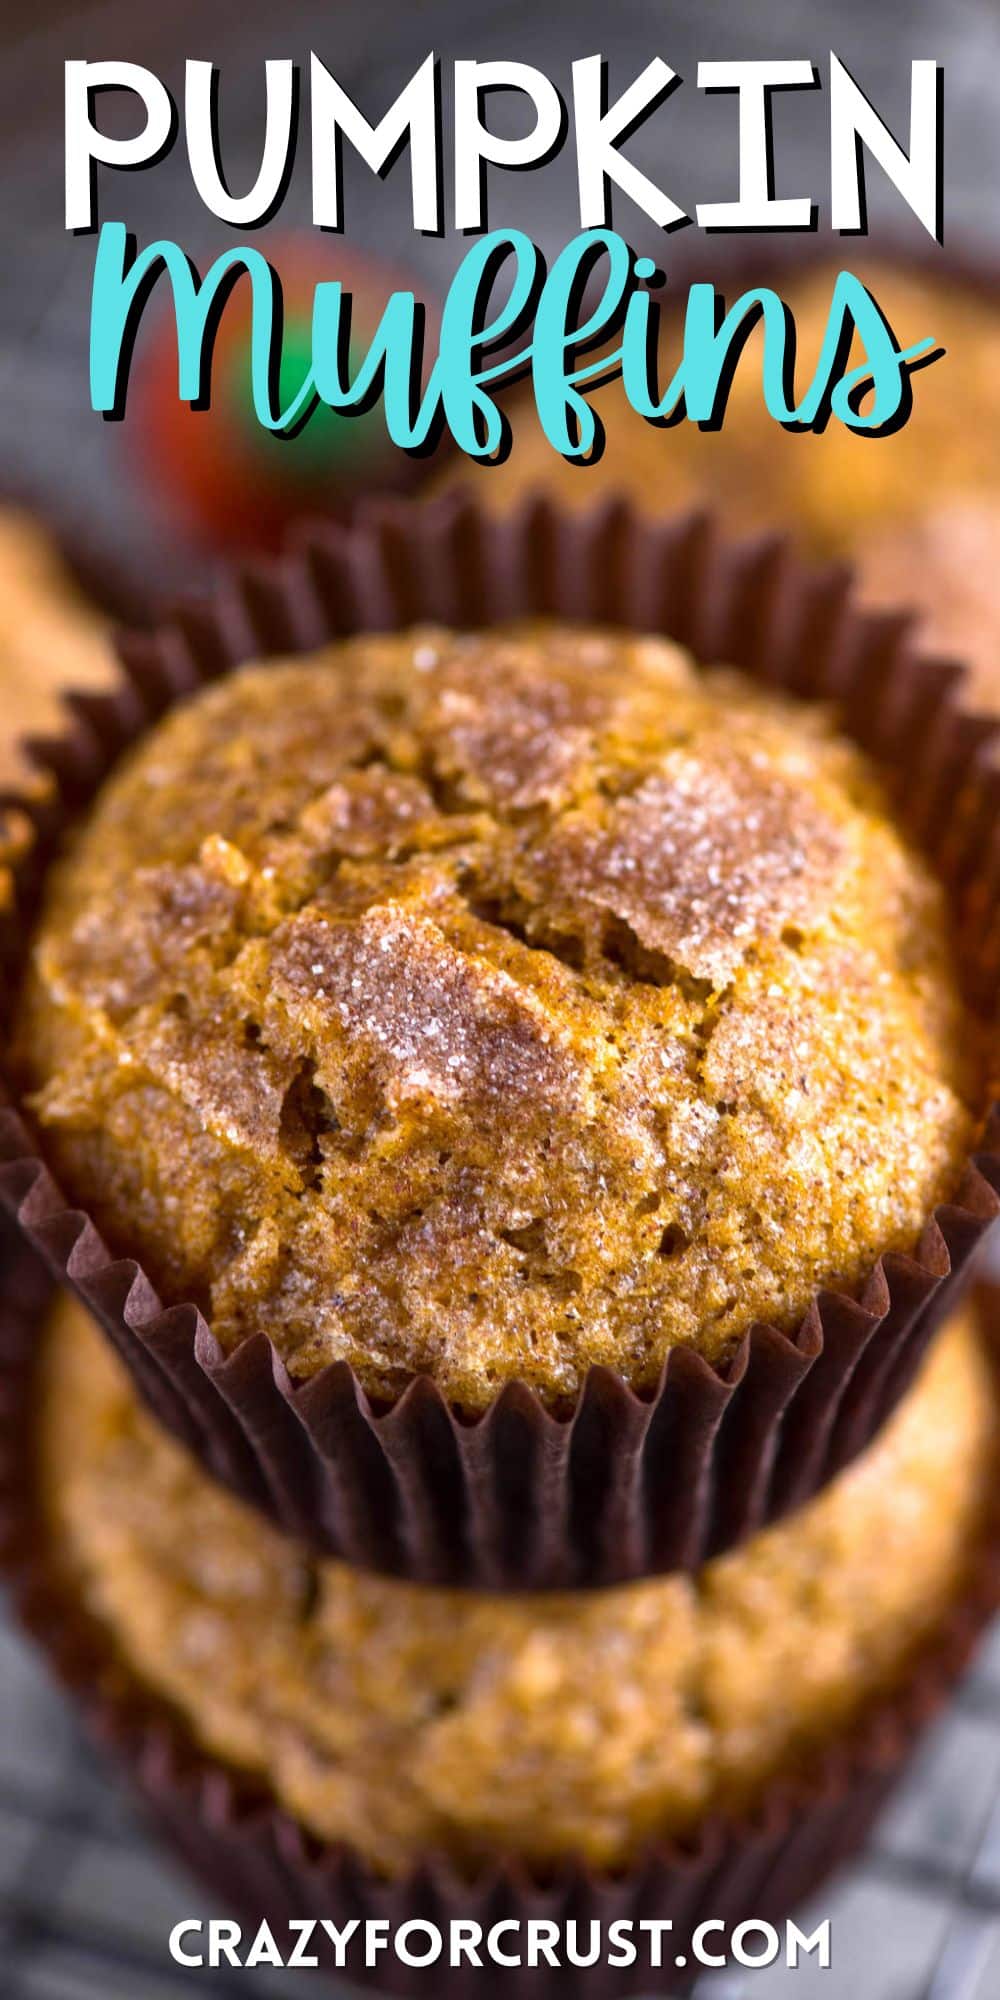 pumpkin muffins stacked in brown cupcake wrappers with words on the image.